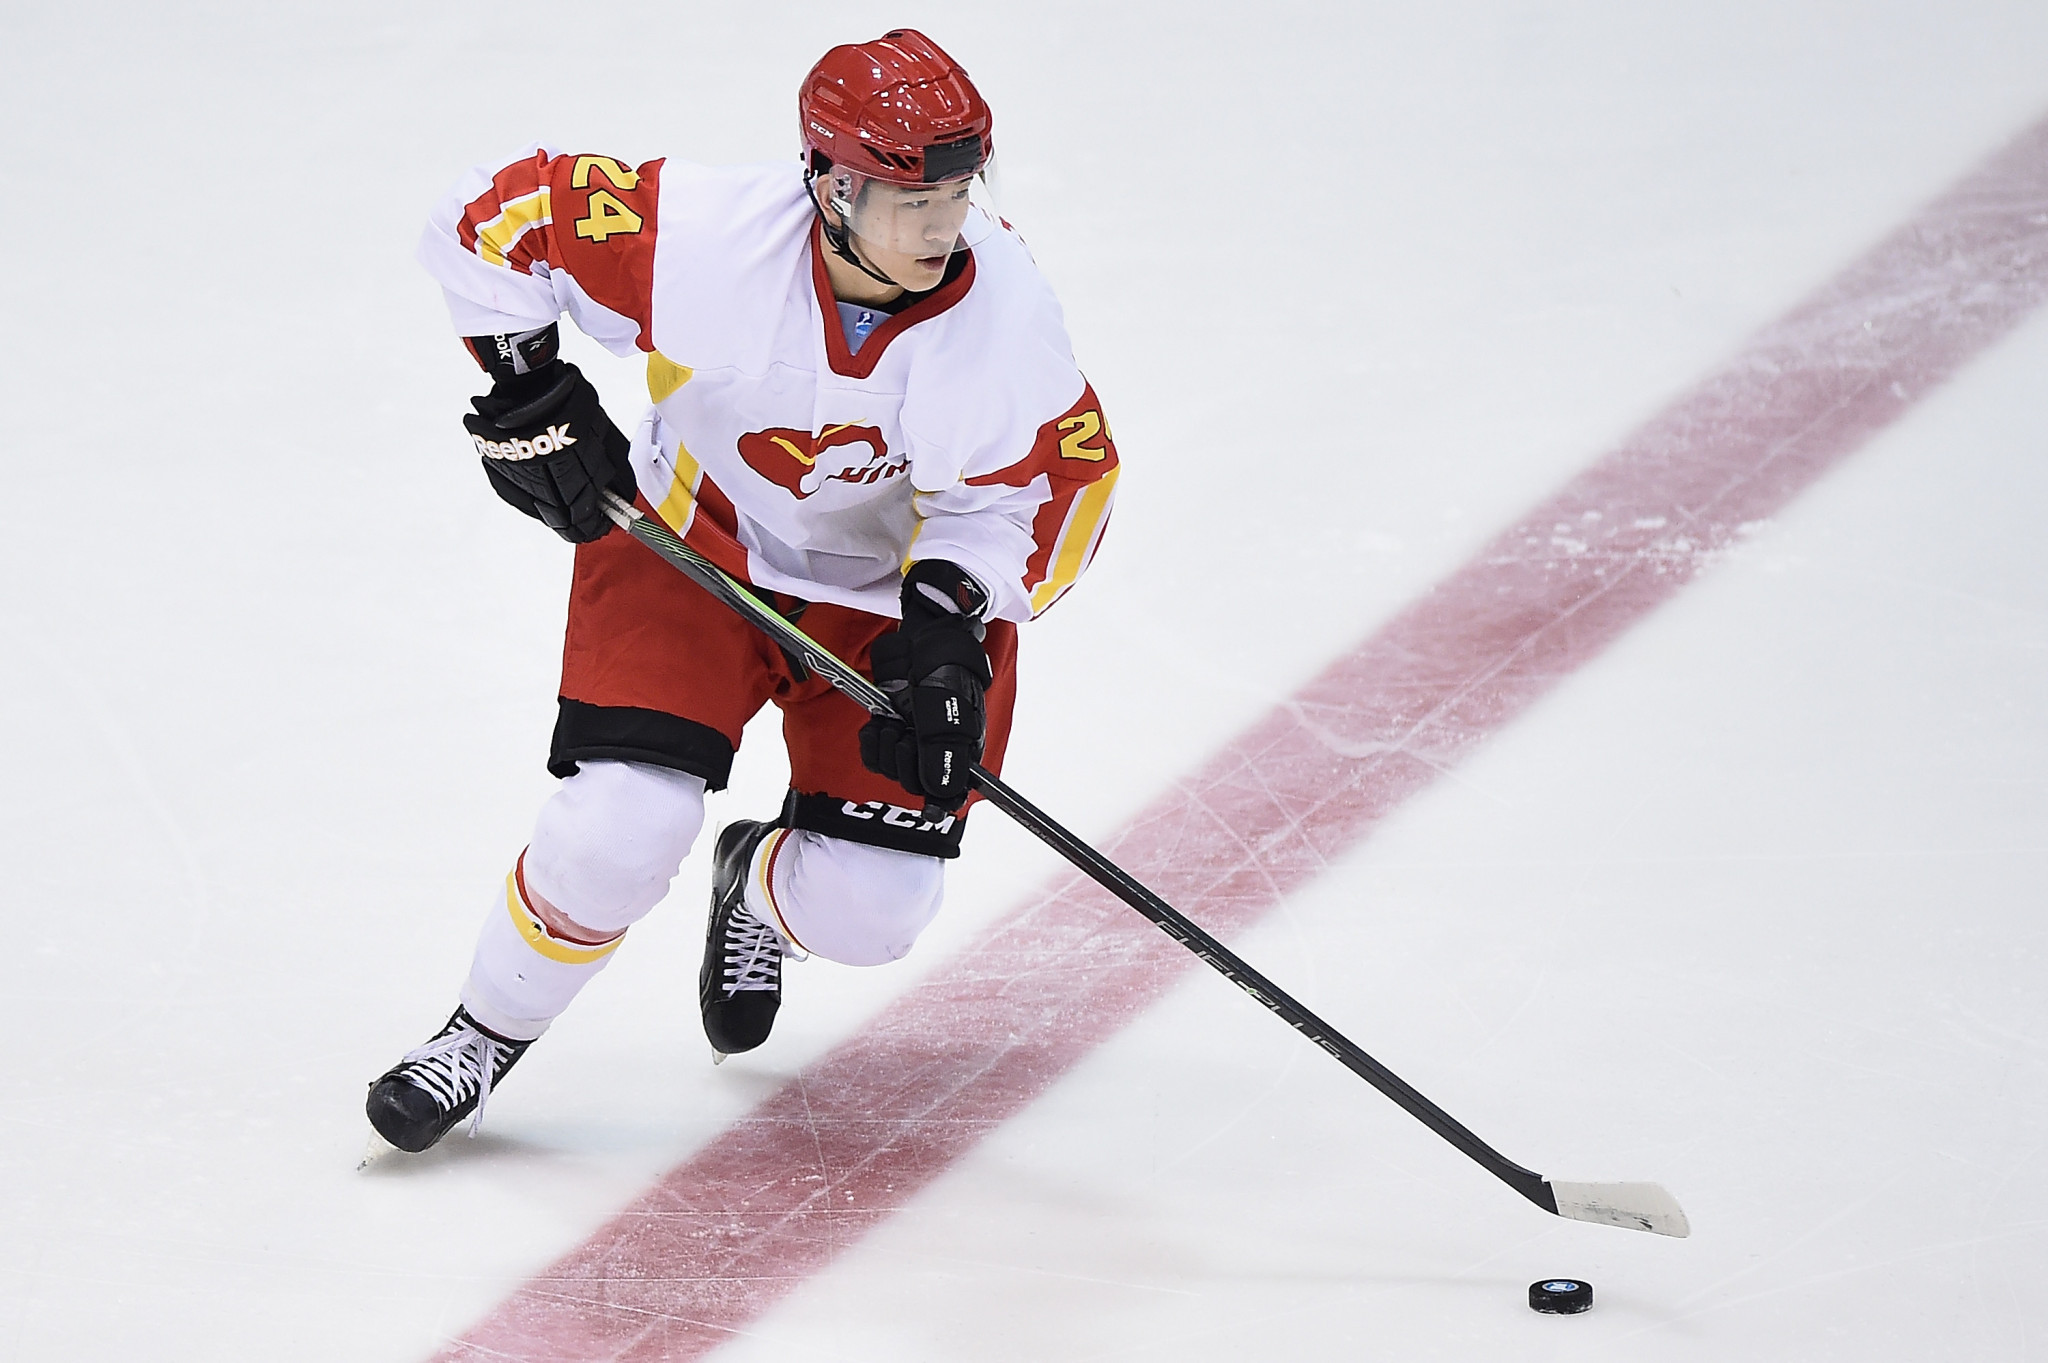 China wants to grow its ice hockey pedigree before Beijing 2022 ©Getty Images